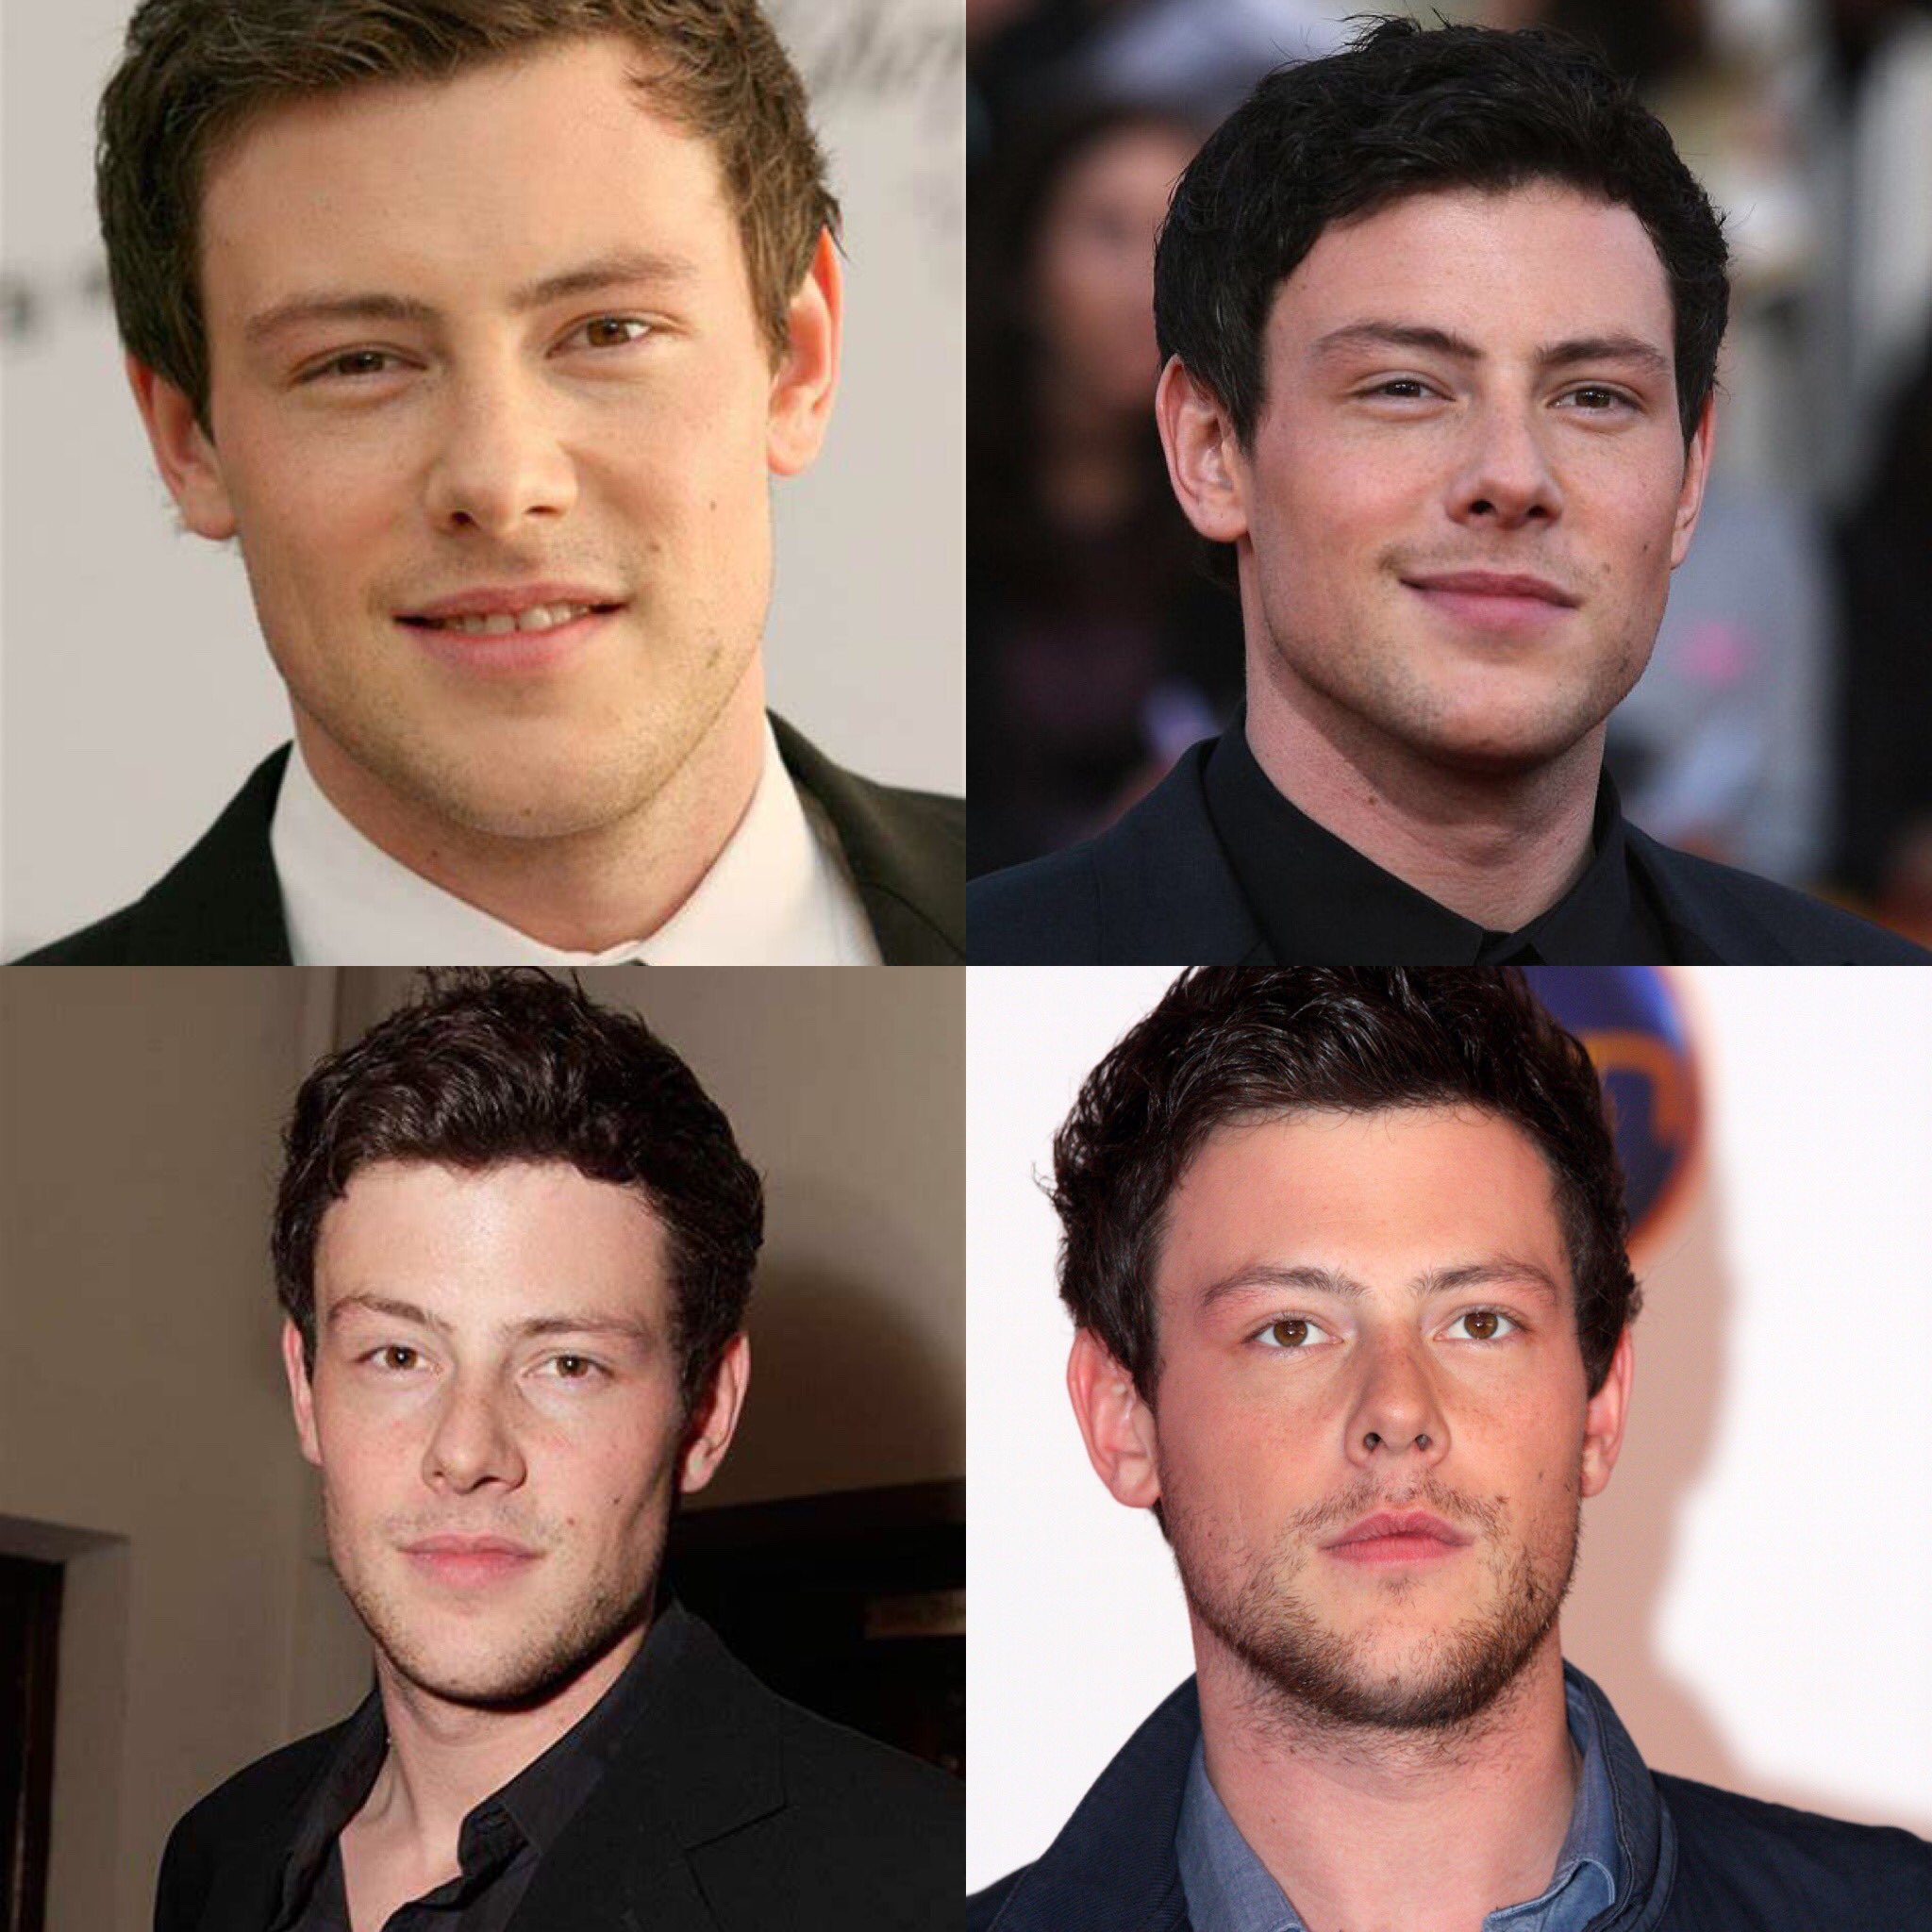 Happy 38 birthday to Cory Monteith up in heaven. May he Rest In Peace.   